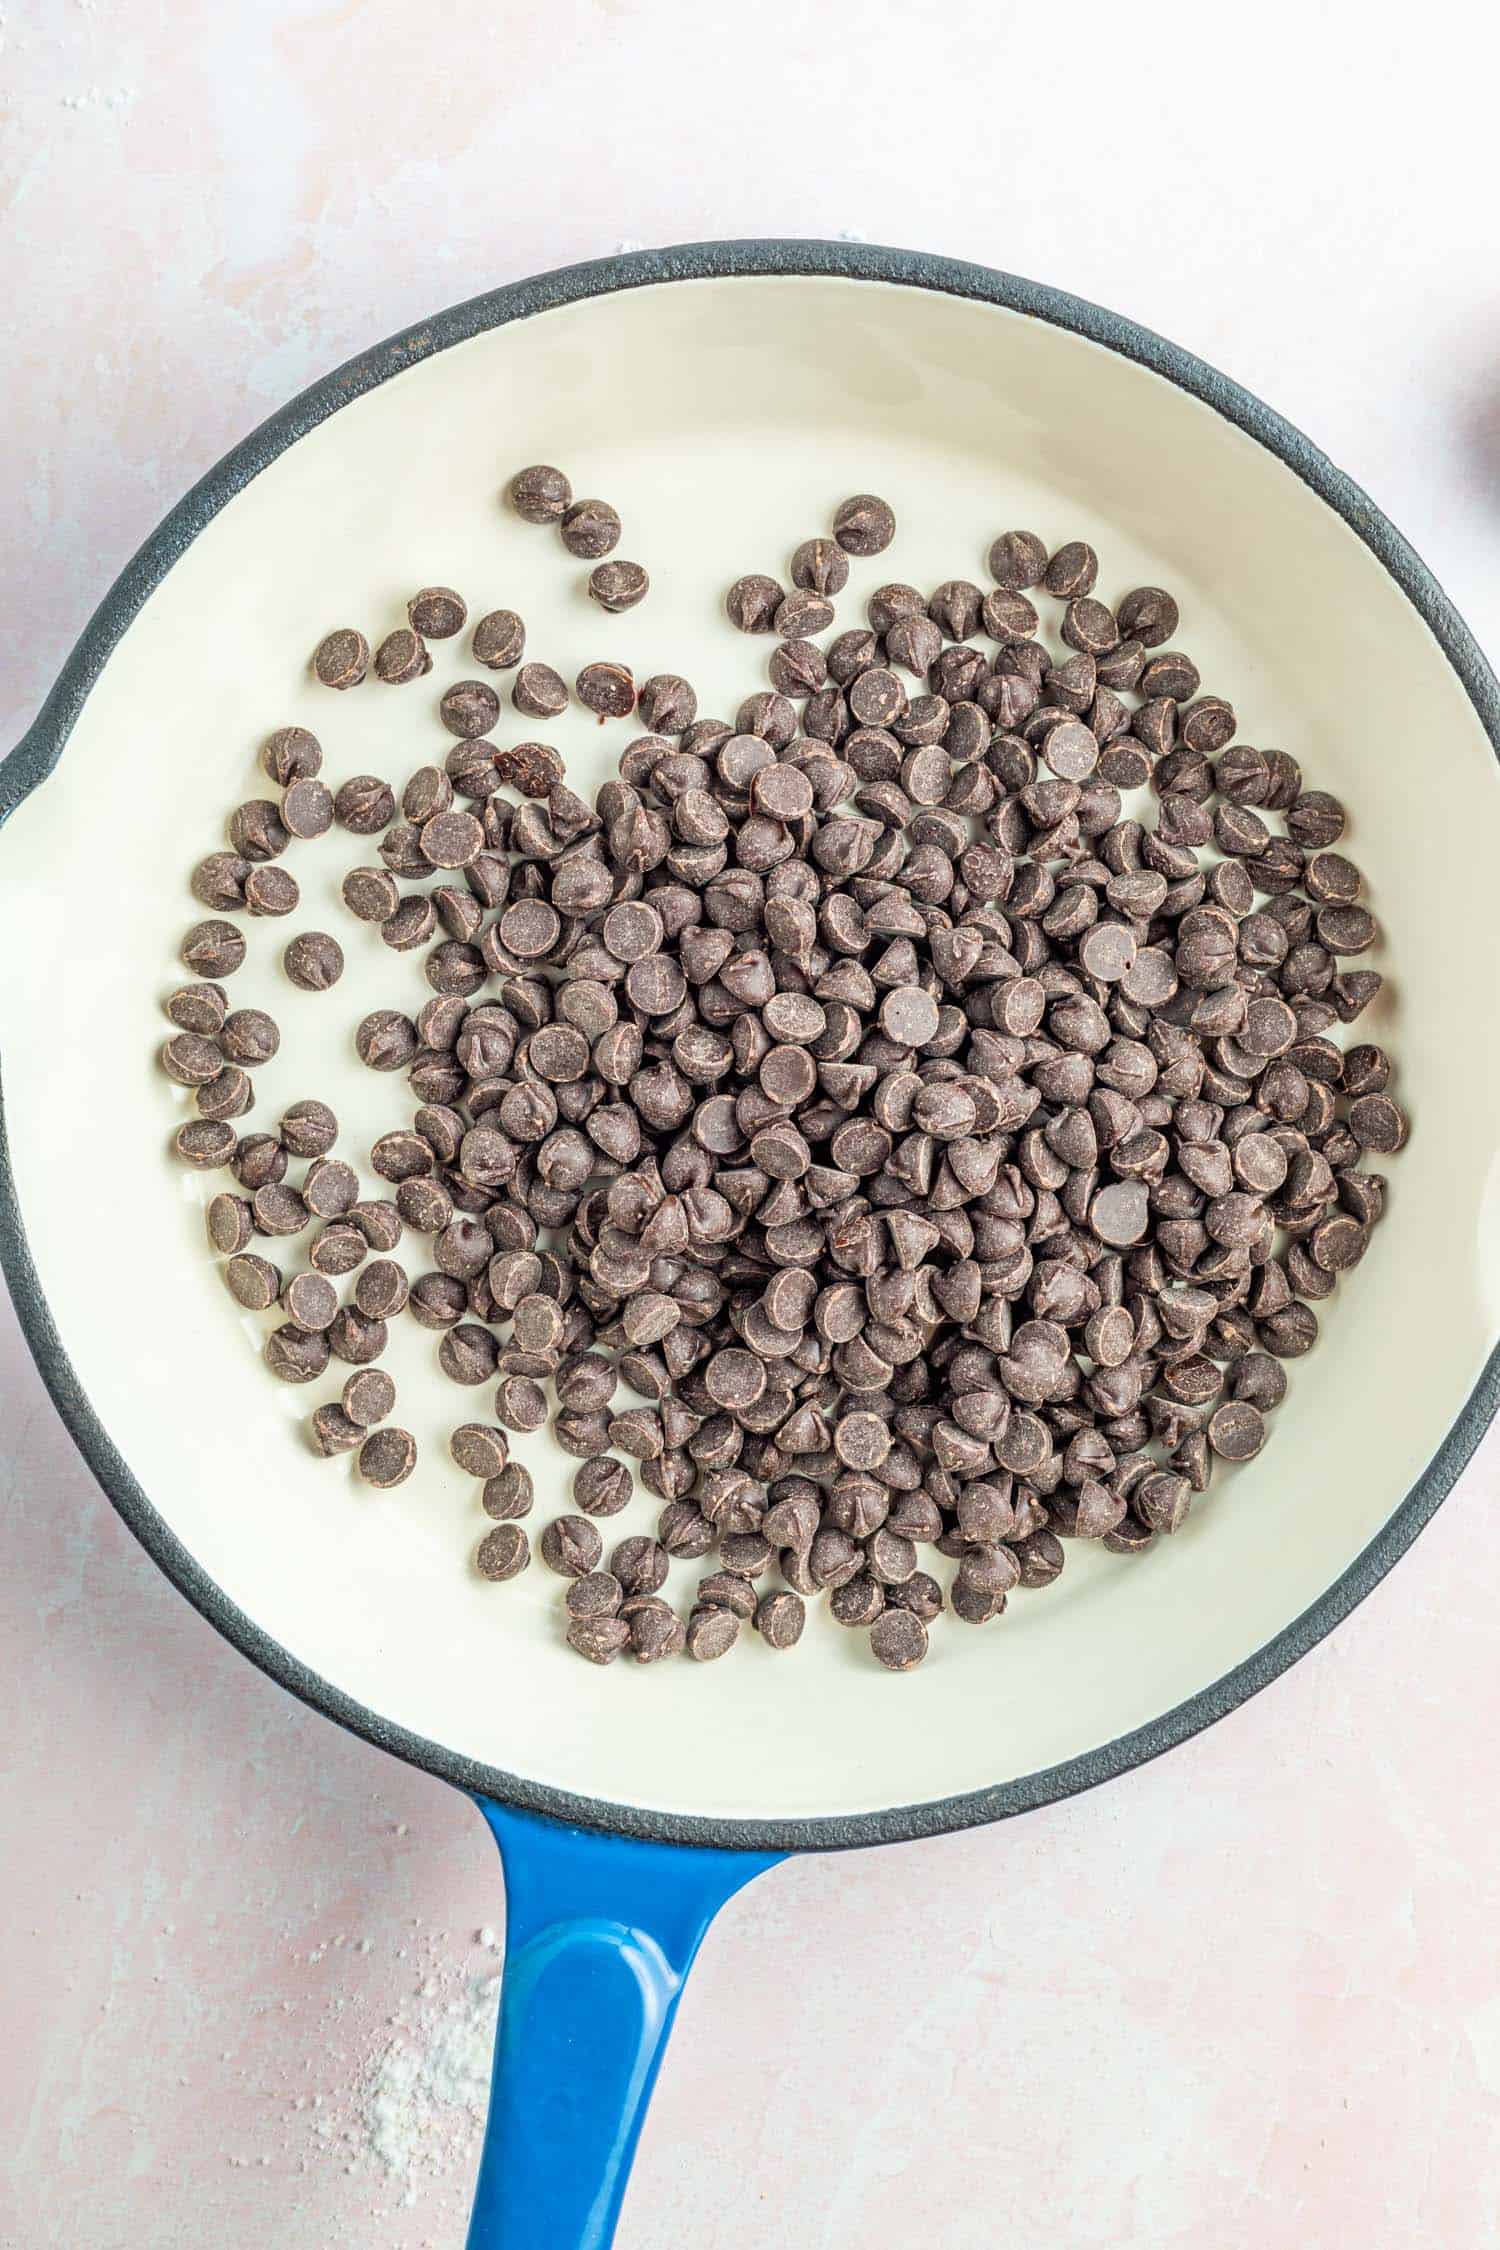 sugar-free chocolate chips in an enameled cast iron skillet